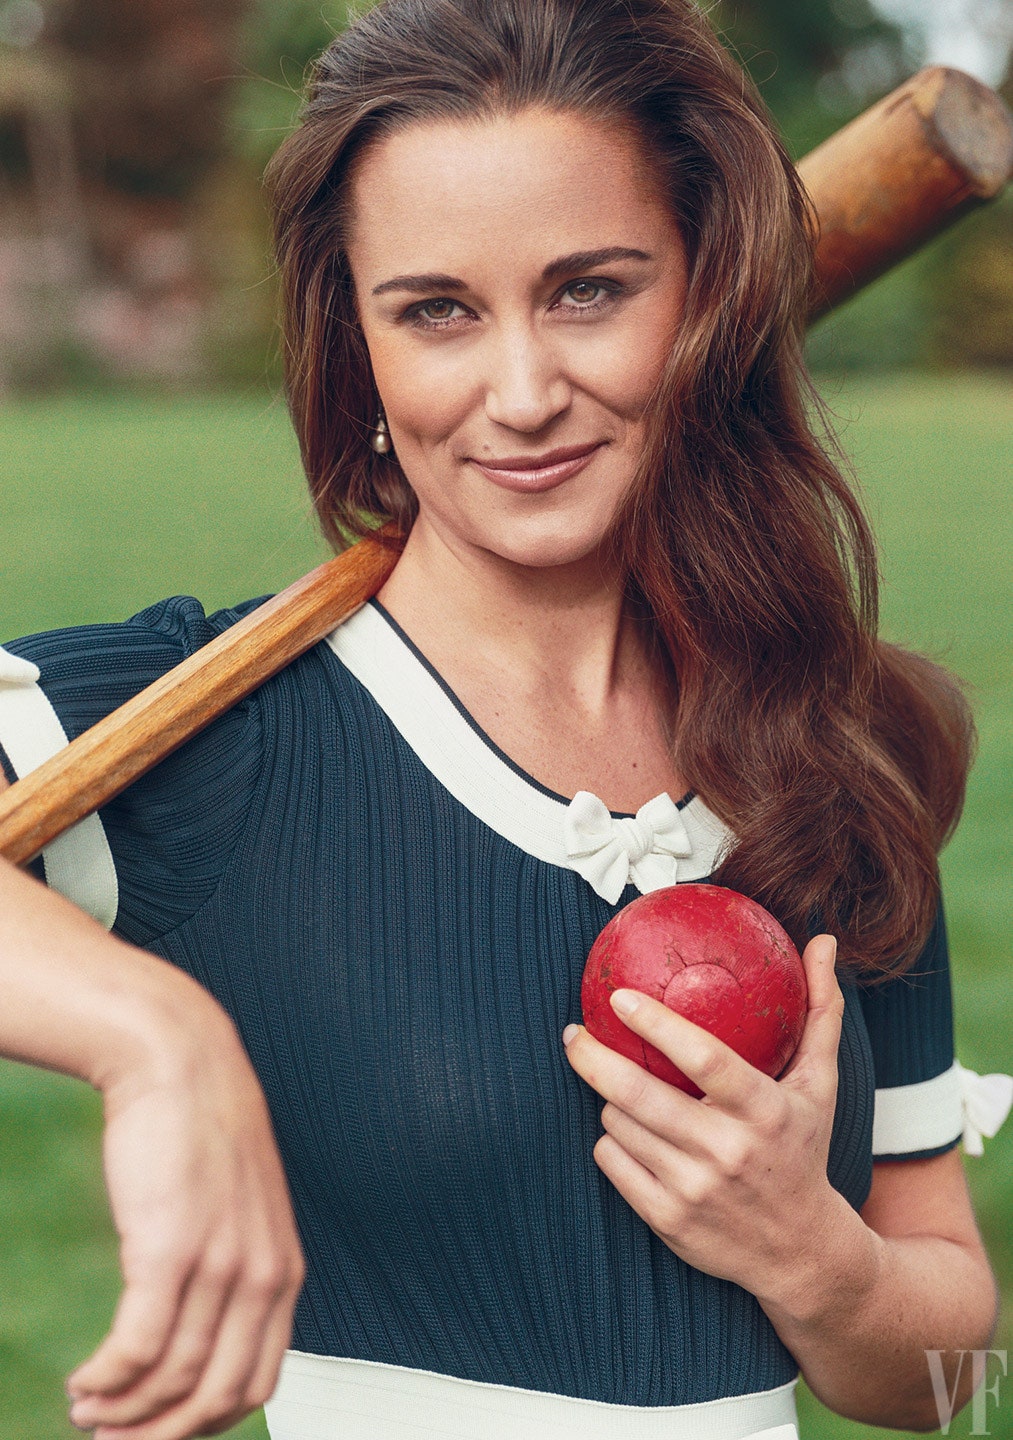 pippa-middleton-croquet-wicket-norman-jean-roy-vf-01